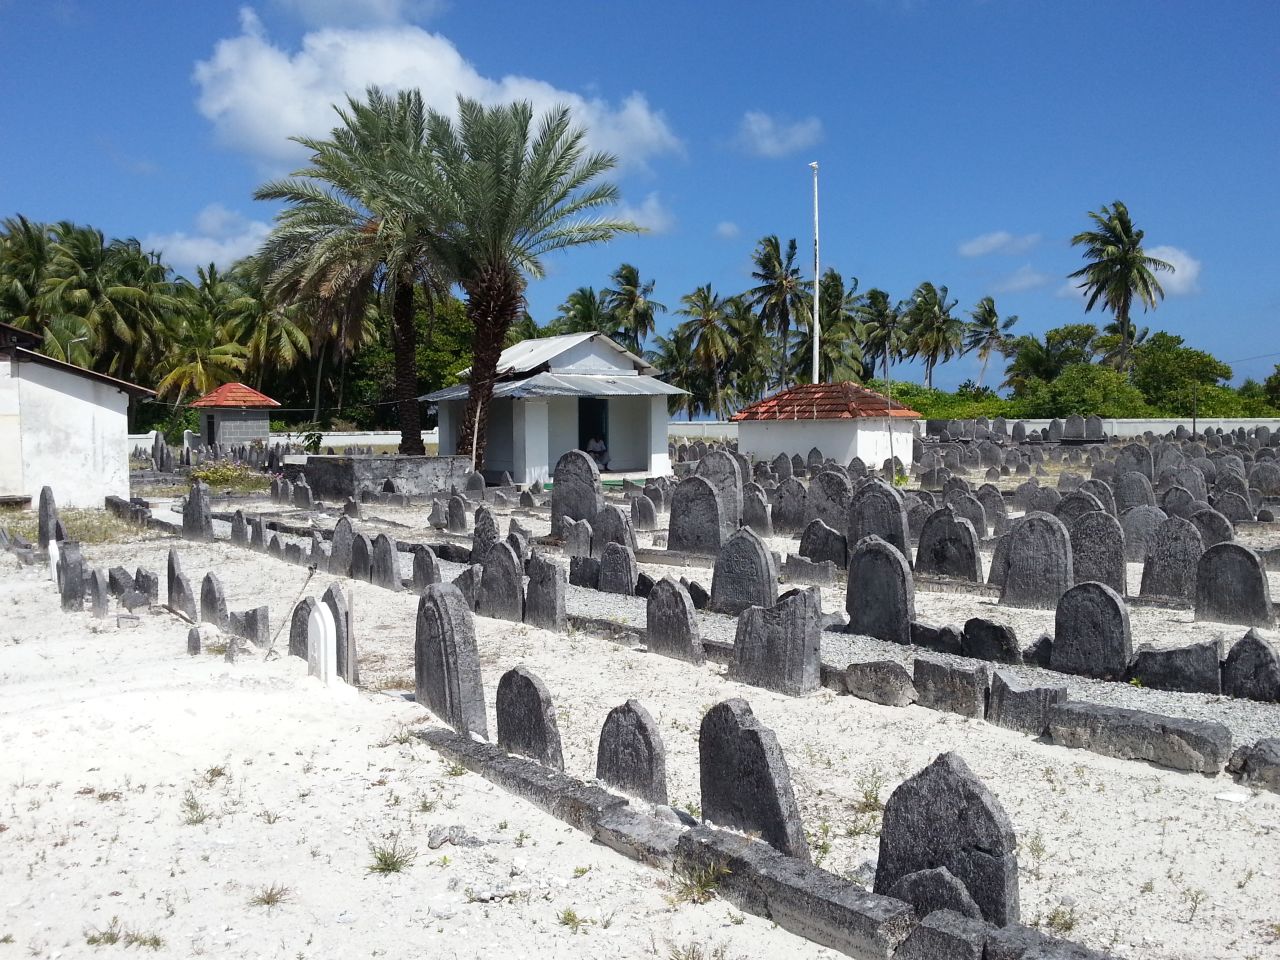 <strong>Koagannu mosques and cemetery, Maldives:</strong> This historic cemetery in the Maldives is included on this year's World Monuments Watch list due to the threat poised by rising sea levels.